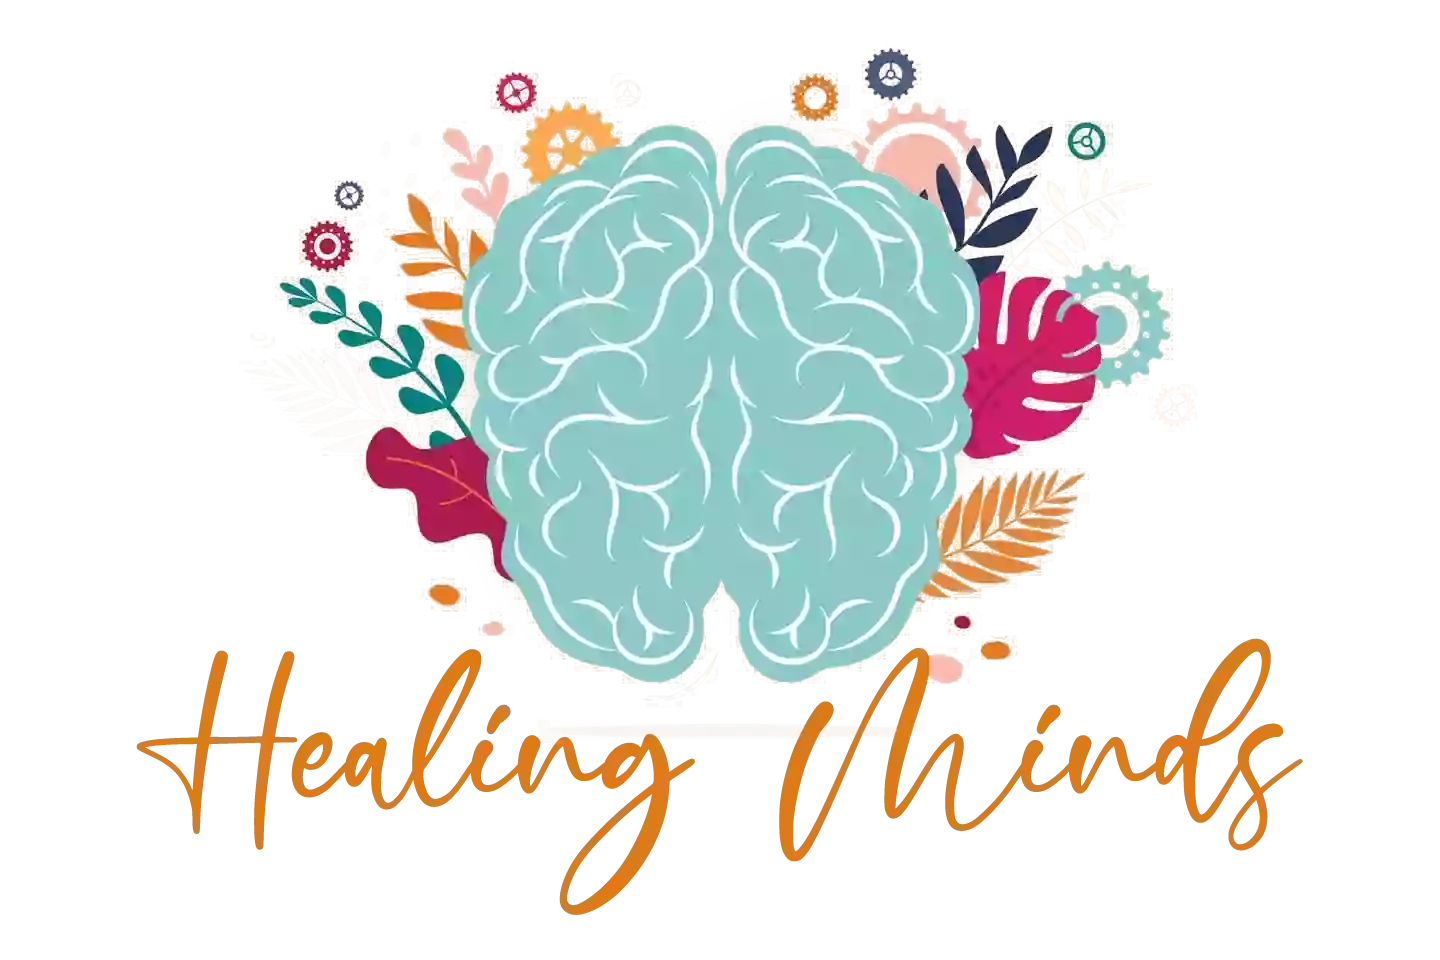 Healing Minds Counseling Services